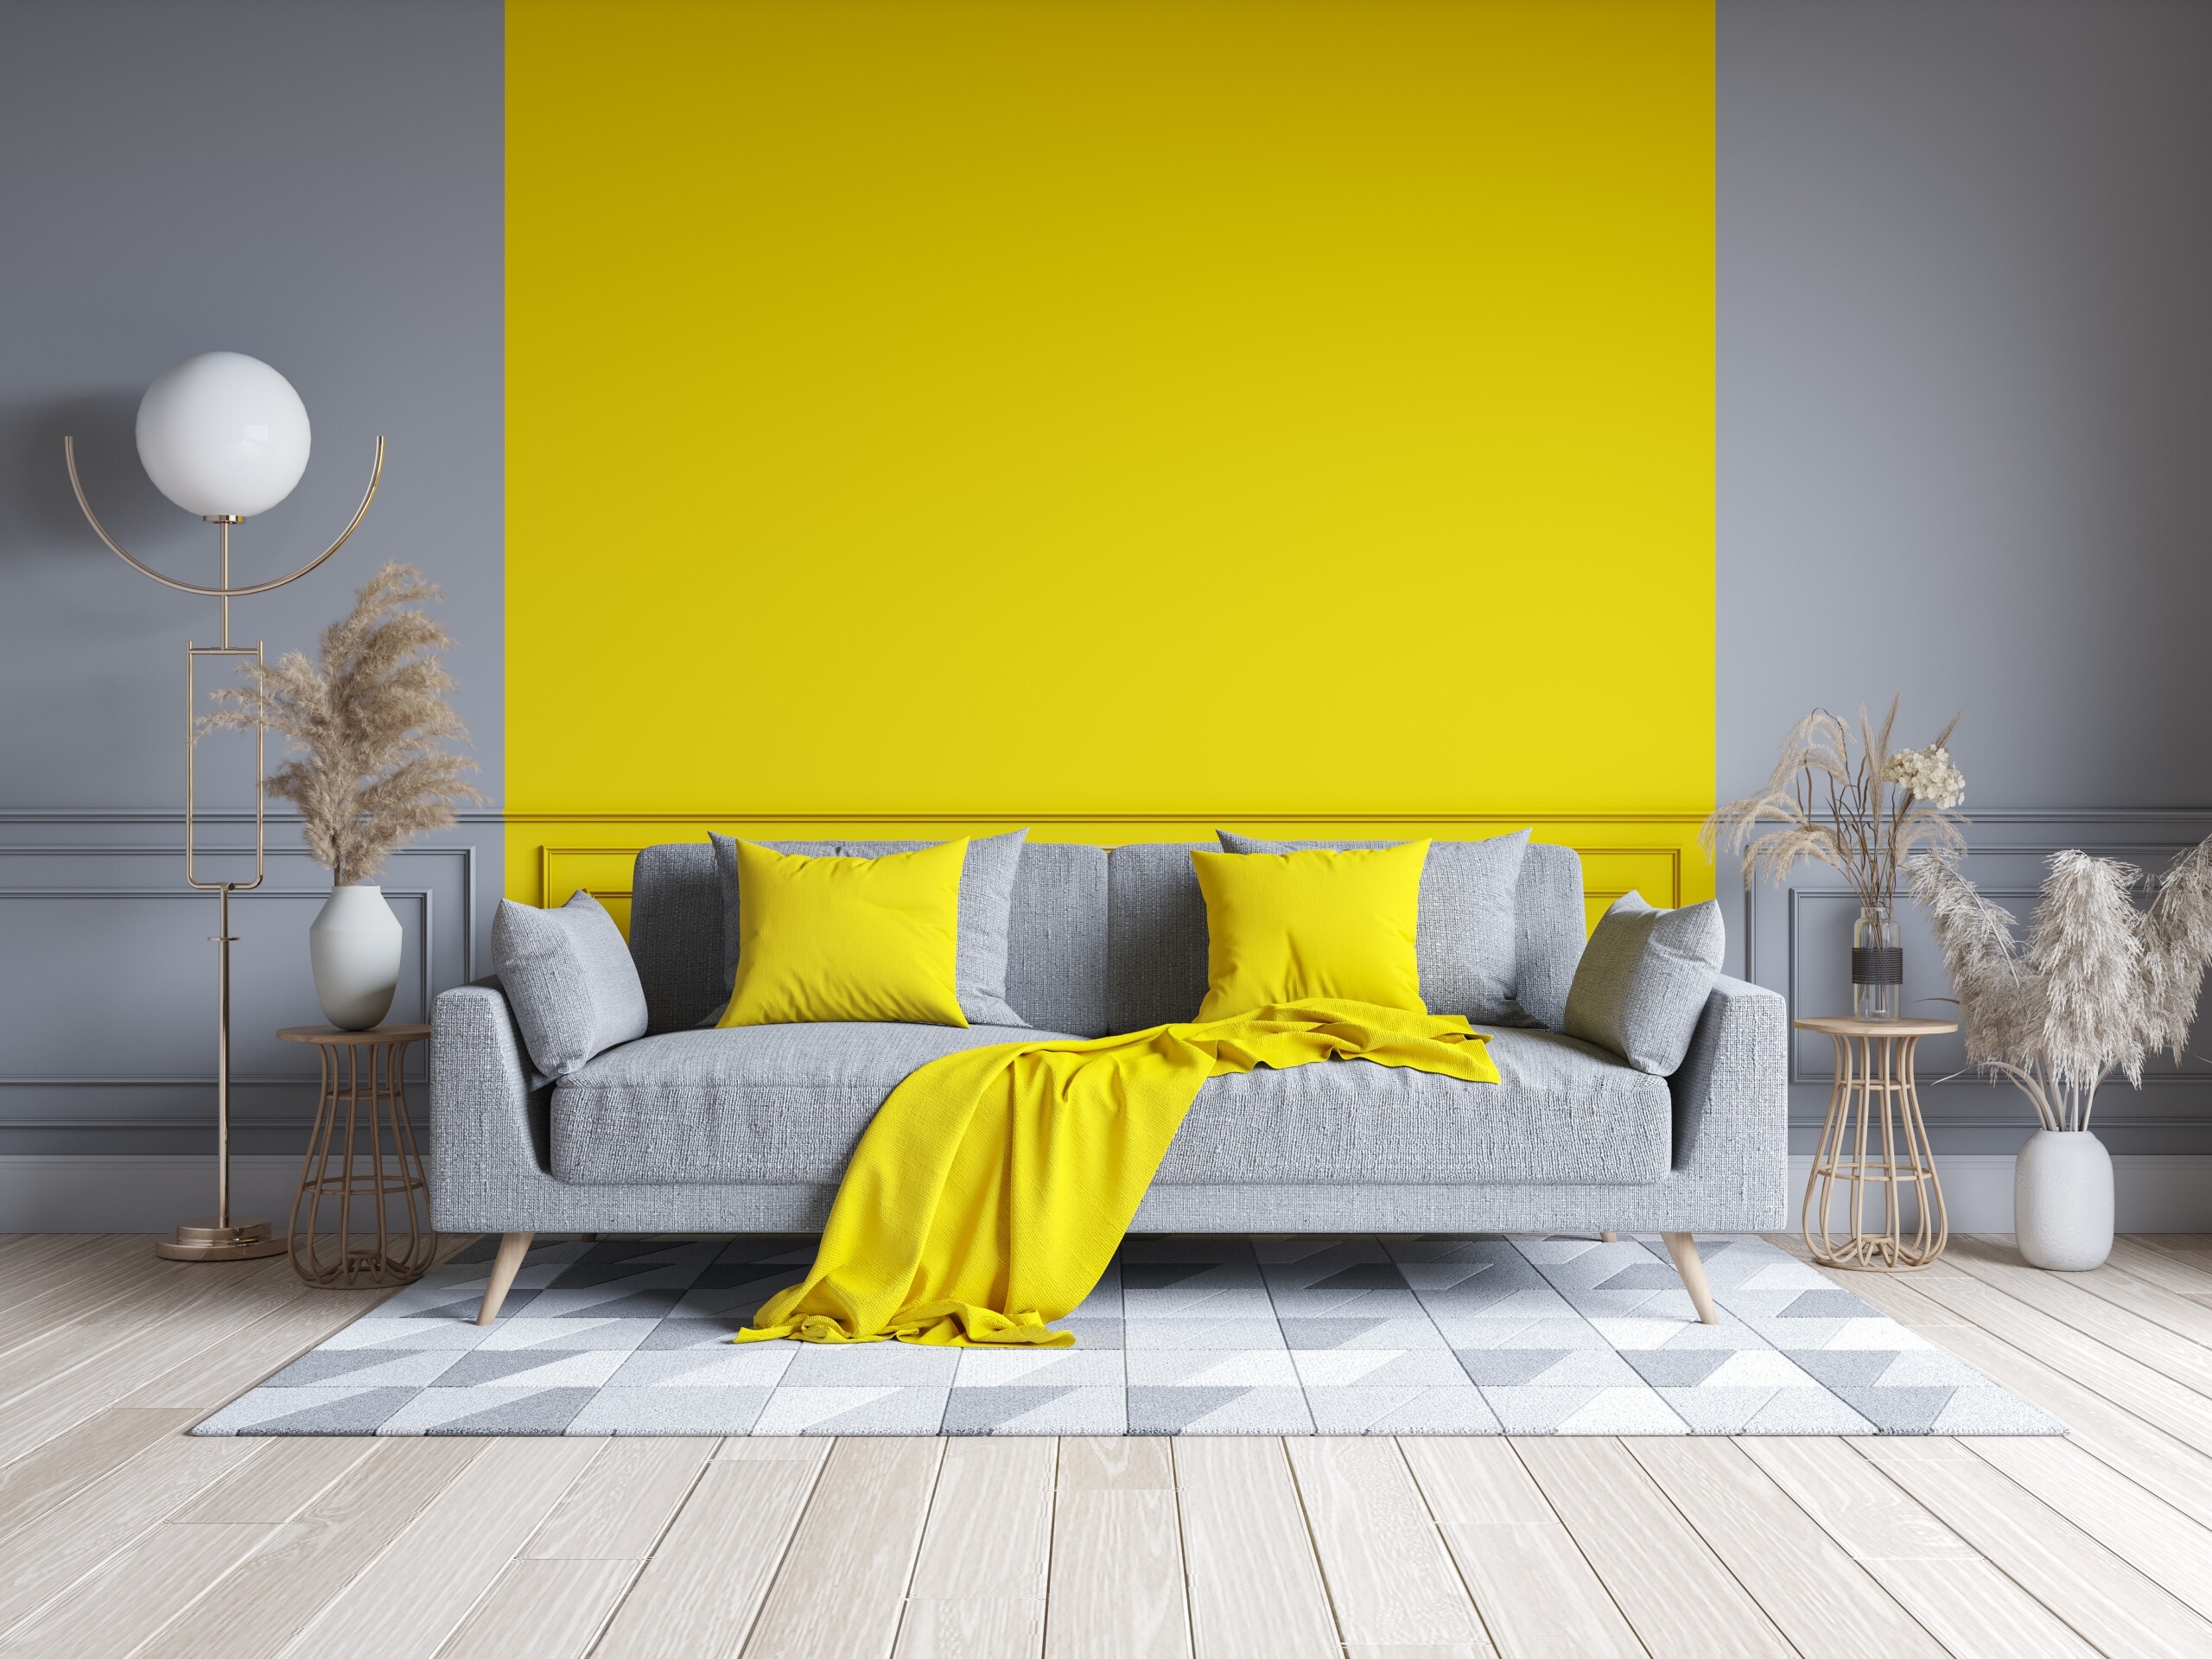 Awesome 9 amazing living room paint ideas for an affordable makeover décor aid throughout fascinating design of room colour